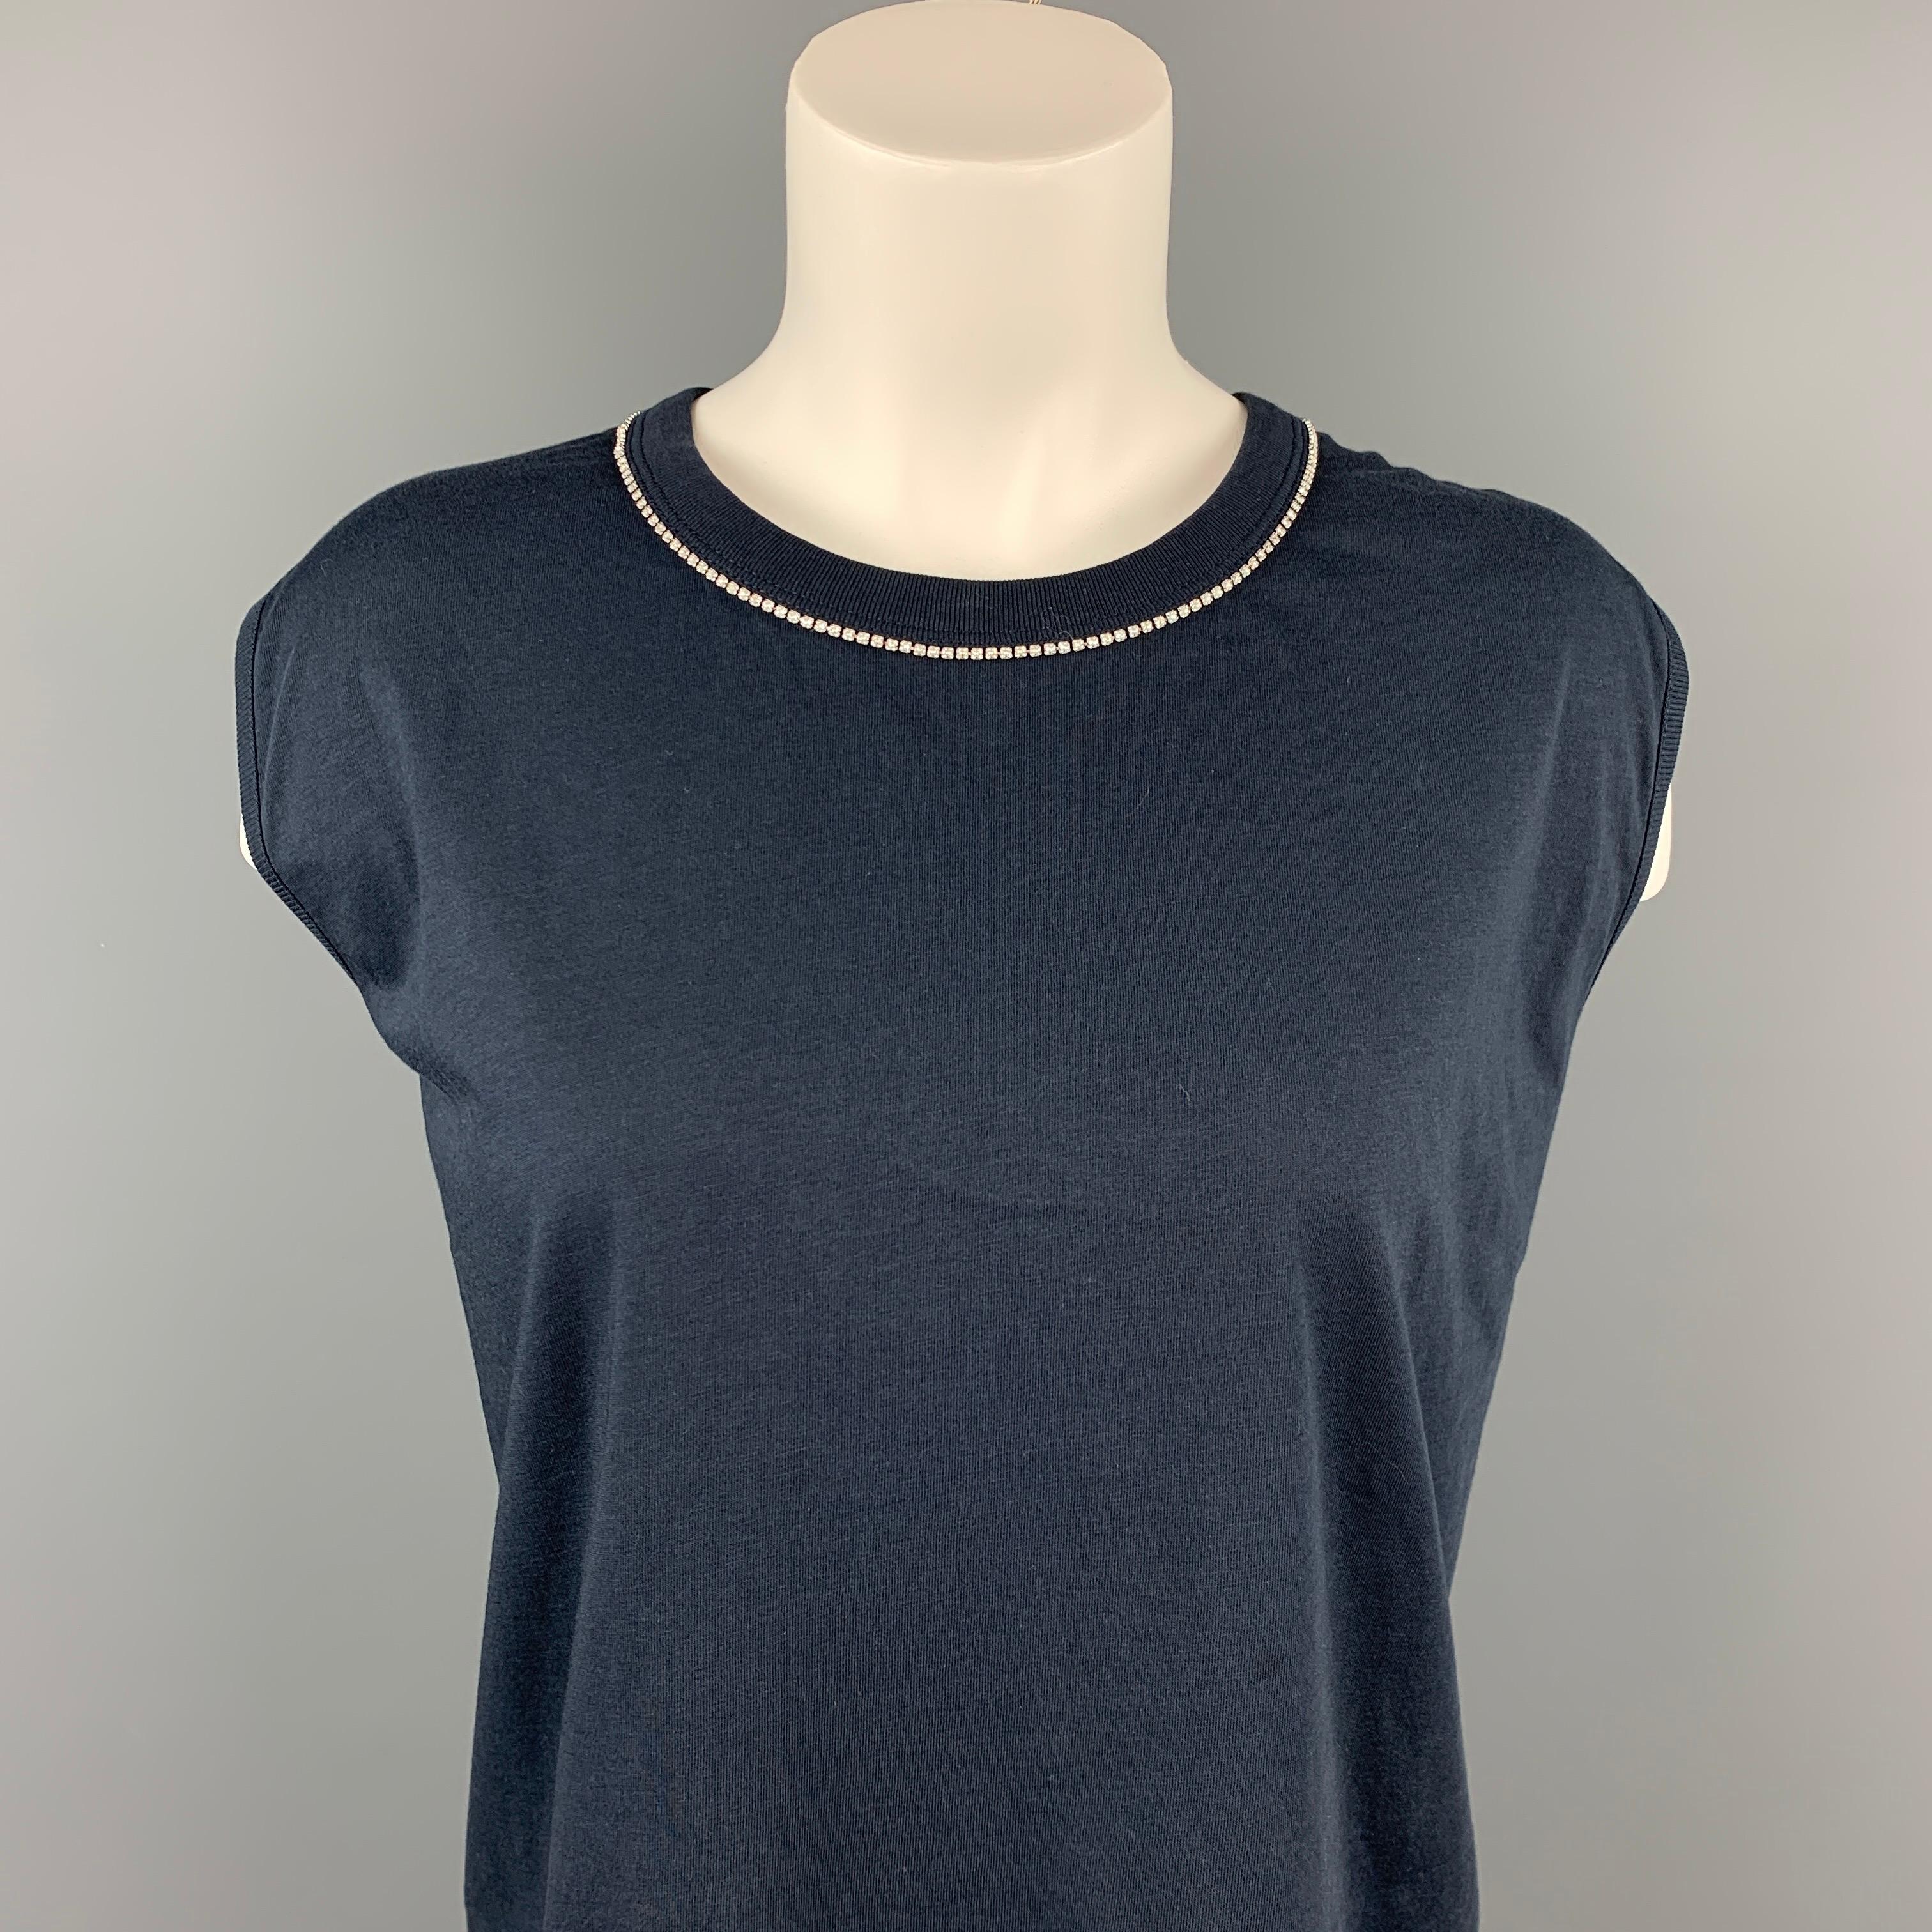 DRIES VAN NOTEN t-shirt comes in a navy cotton featuring a sleeveless style, rhinestone trim design, and a crew-neck. 

Very Good Pre-Owned Condition.
Marked: L

Measurements:

Shoulder: 17 in.
Bust: 40 in.
Length: 25 in. 